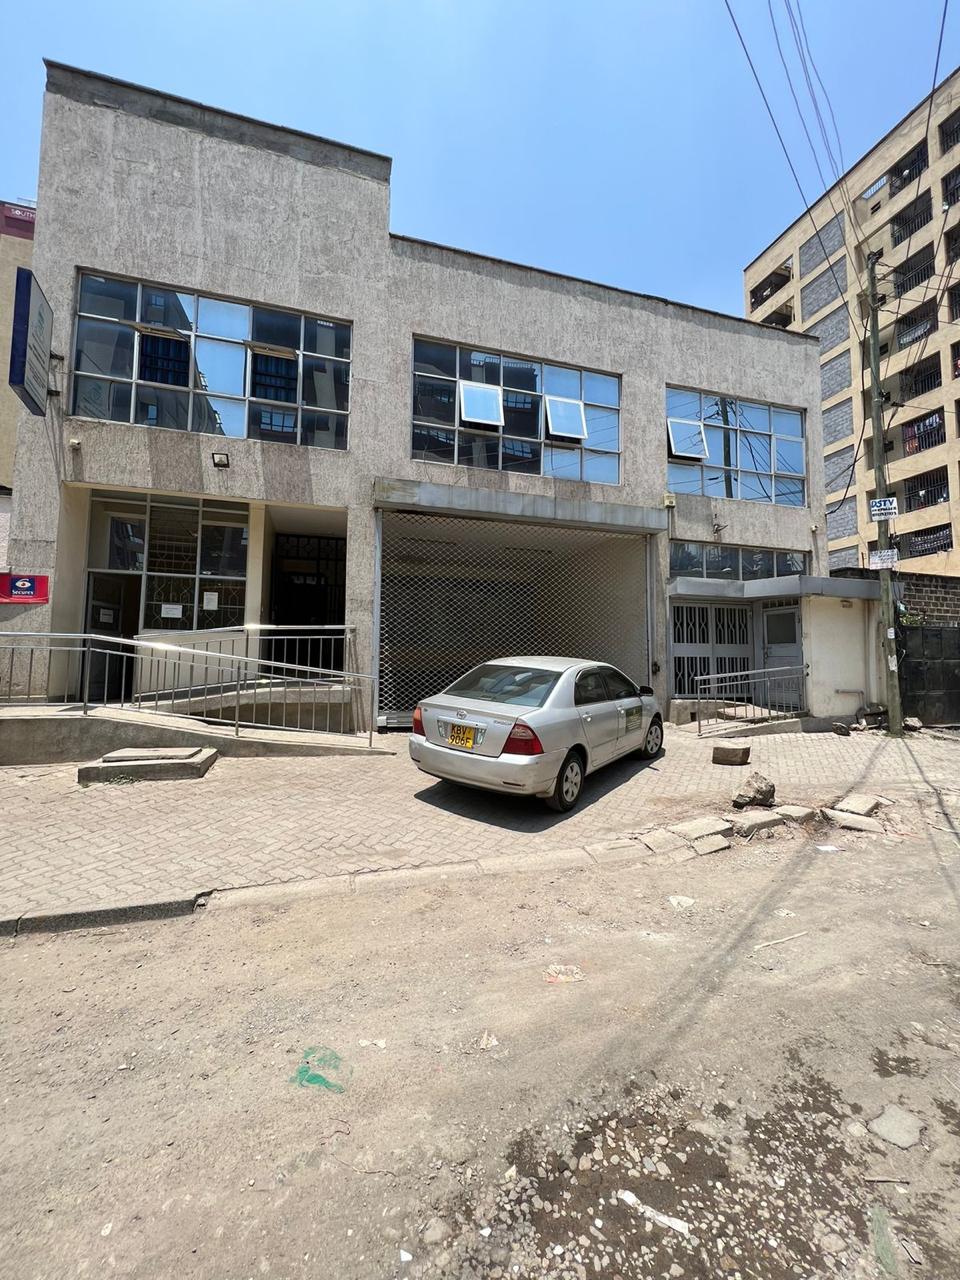 Commercial property for sale located along kapiti road south B shopping center. Sitting on 50/100. Approved plan for 8 floors. Price: 150M Musilli Homes